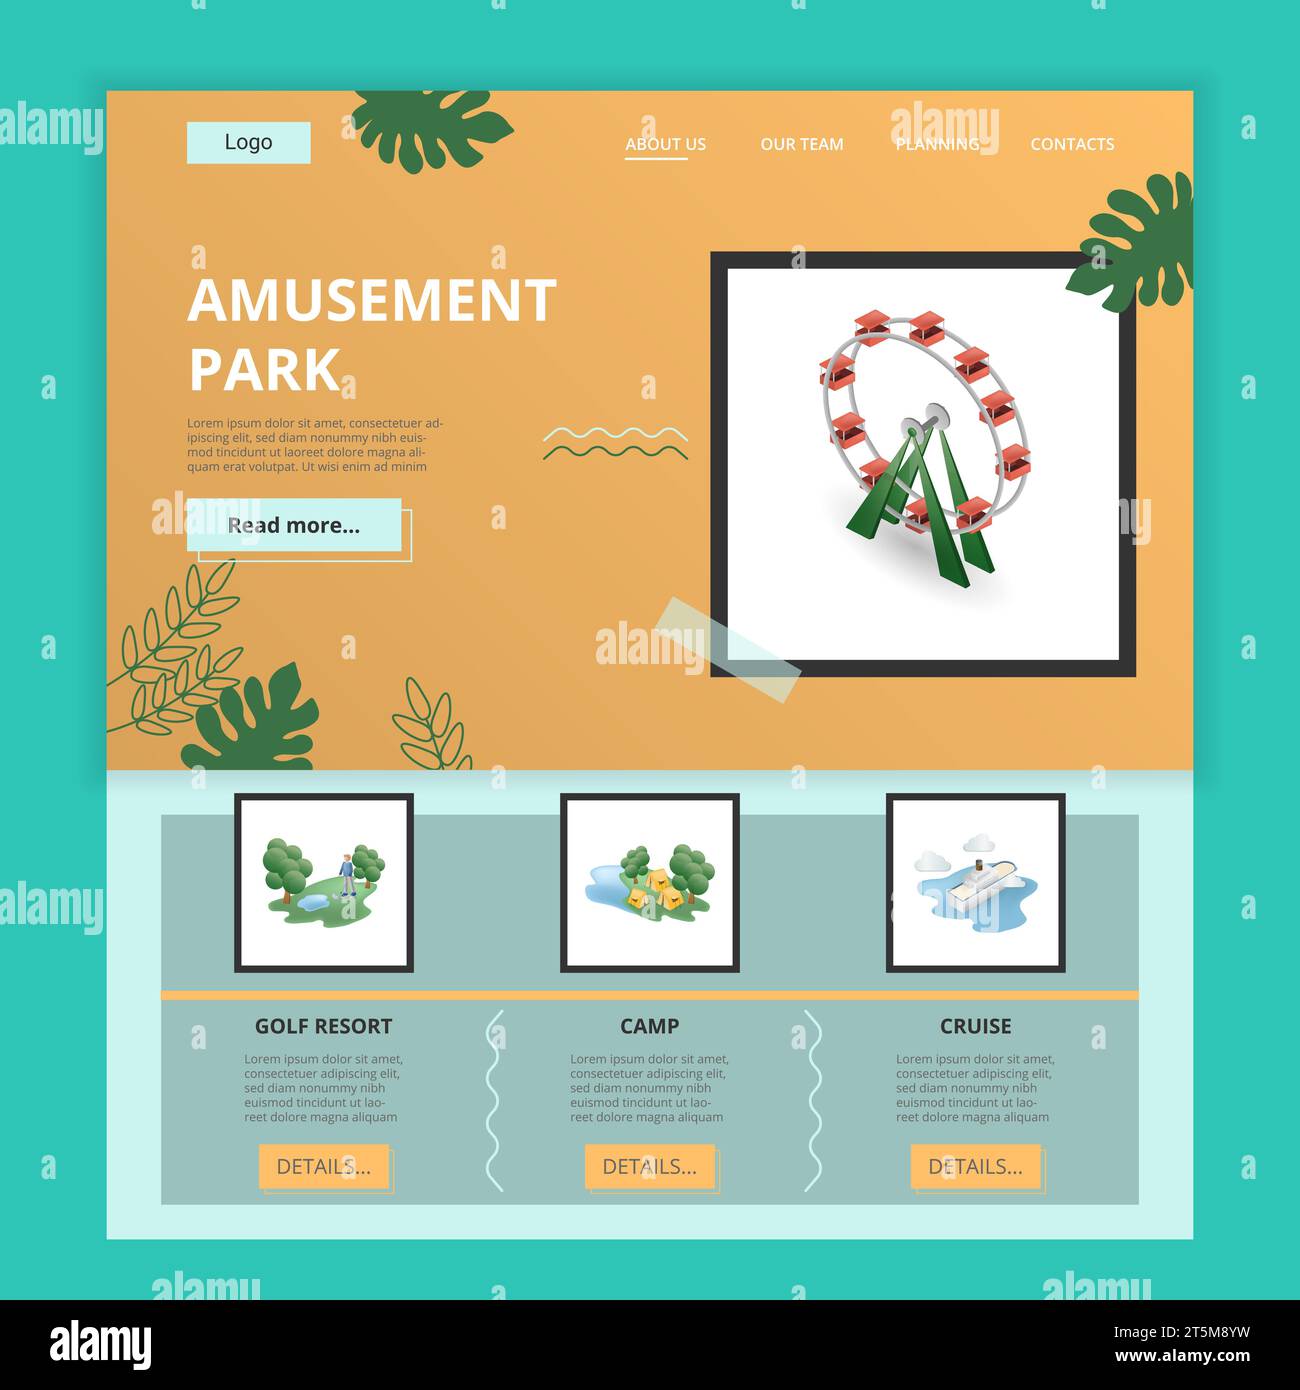 Amusement park flat landing page website template. Golf resort, camp, cruise. Web banner with header, content and footer. Vector illustration. Stock Vector